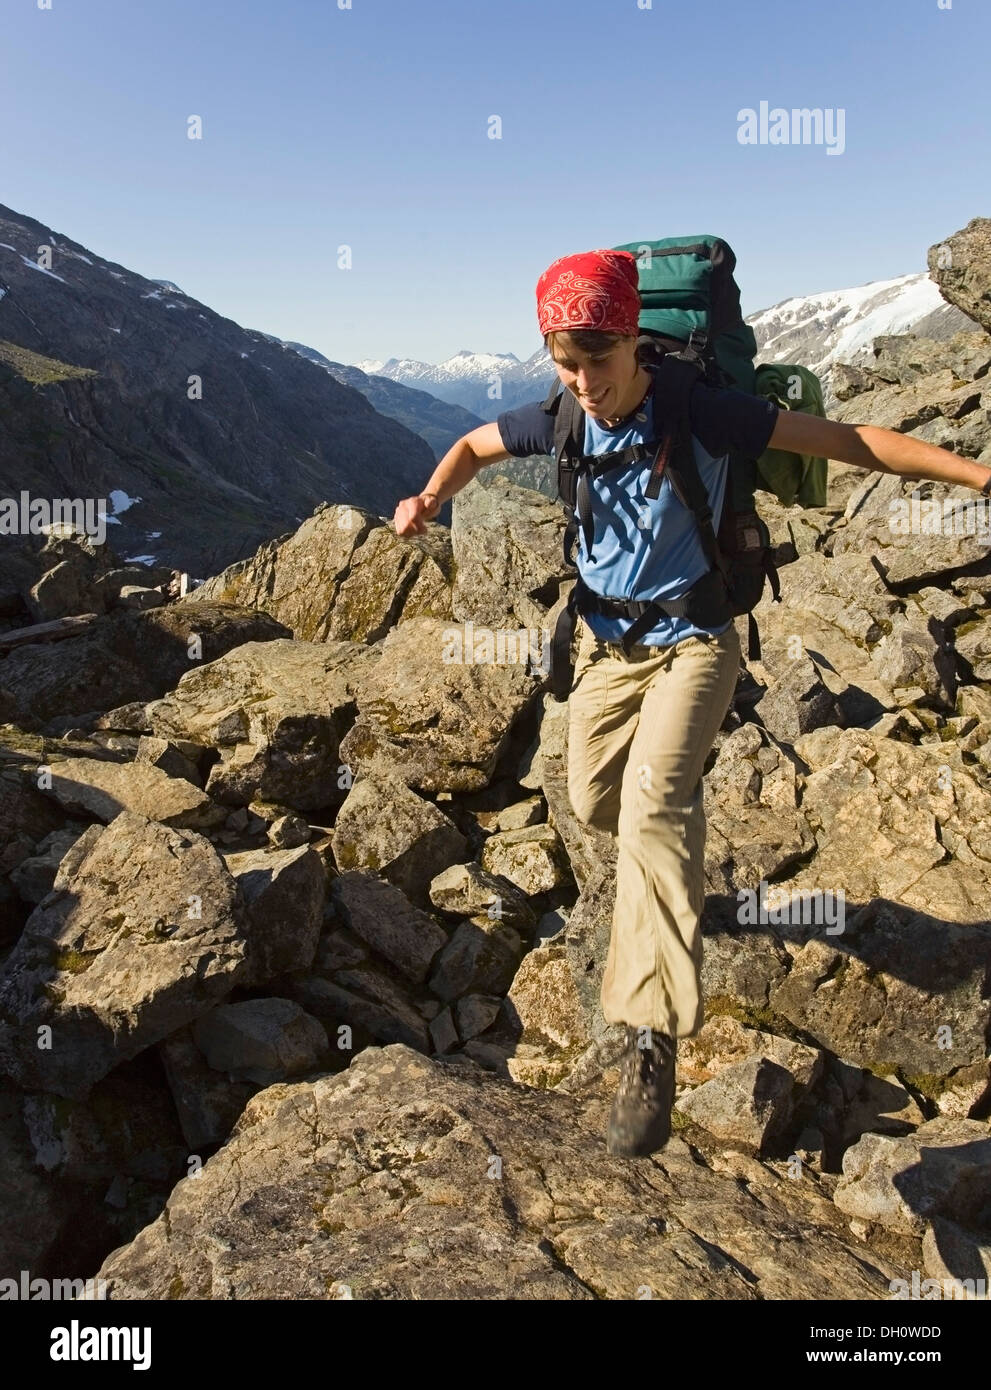 Young woman jumping, hiking, backpacking, hiker, legendary GOLDEN STAIRS of Chilkoot Trail, Pass, view into Taja River Valley, Stock Photo